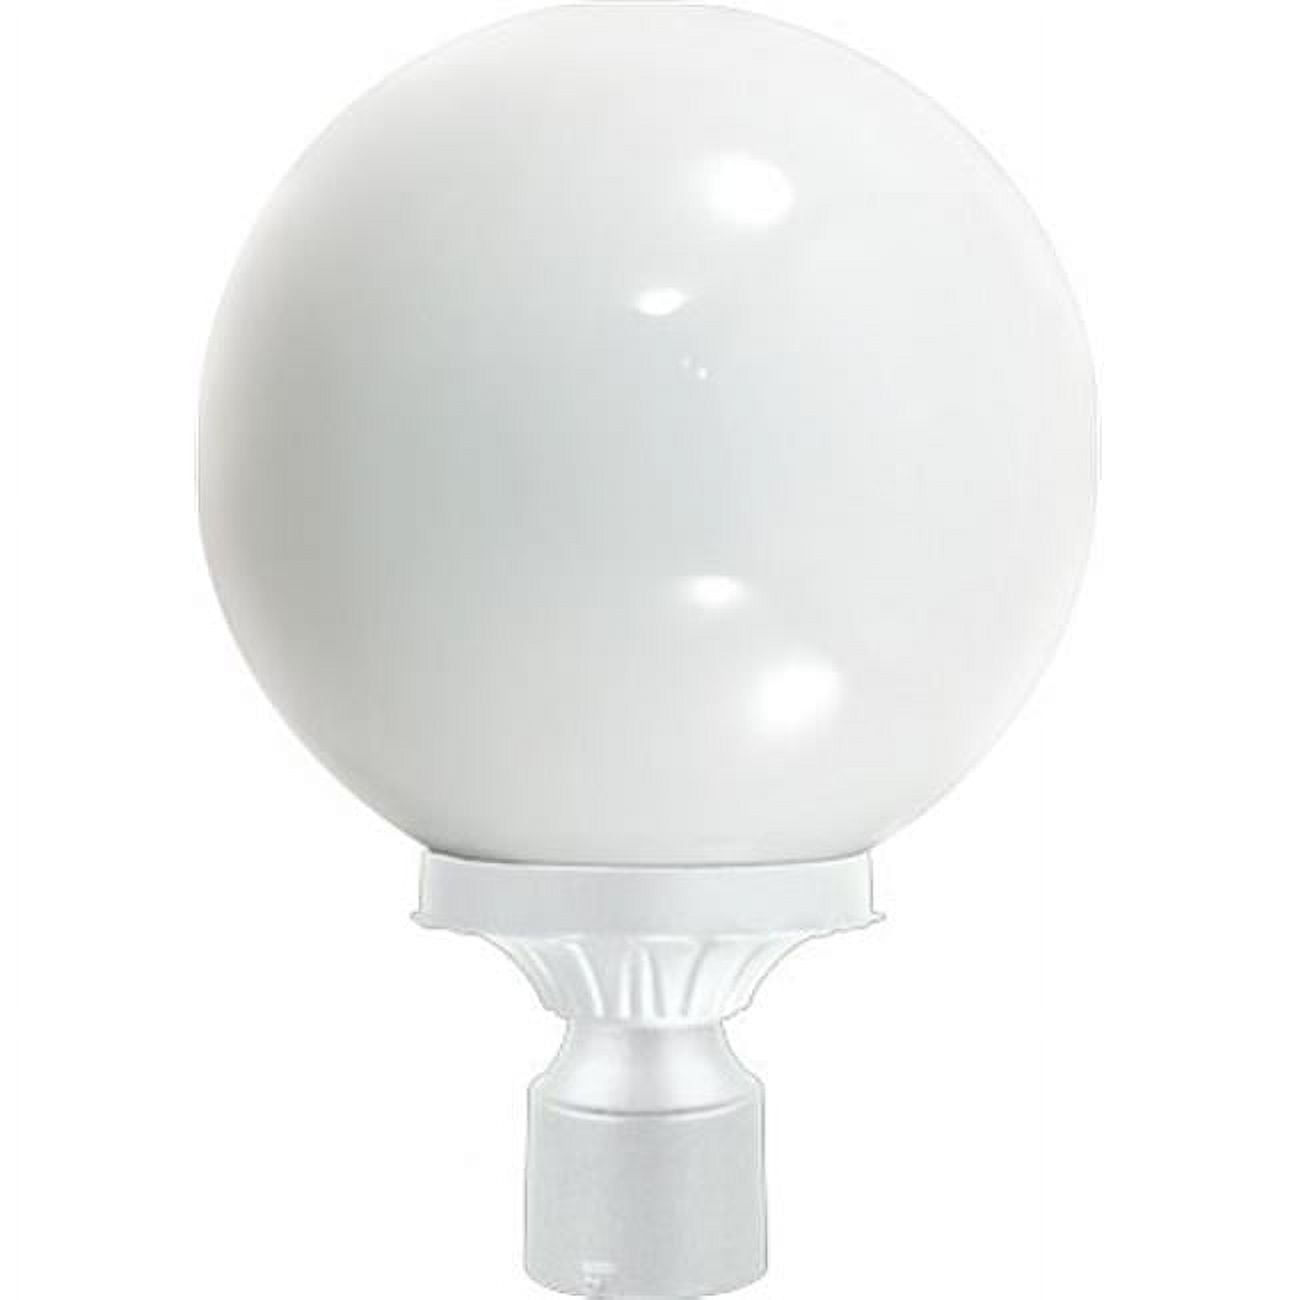 Picture of Dabmar Lighting GM240-W Powder Coated Cast Aluminum Post Top Light Fixture, White - 16.81 x 11.75 x 11.75 in.